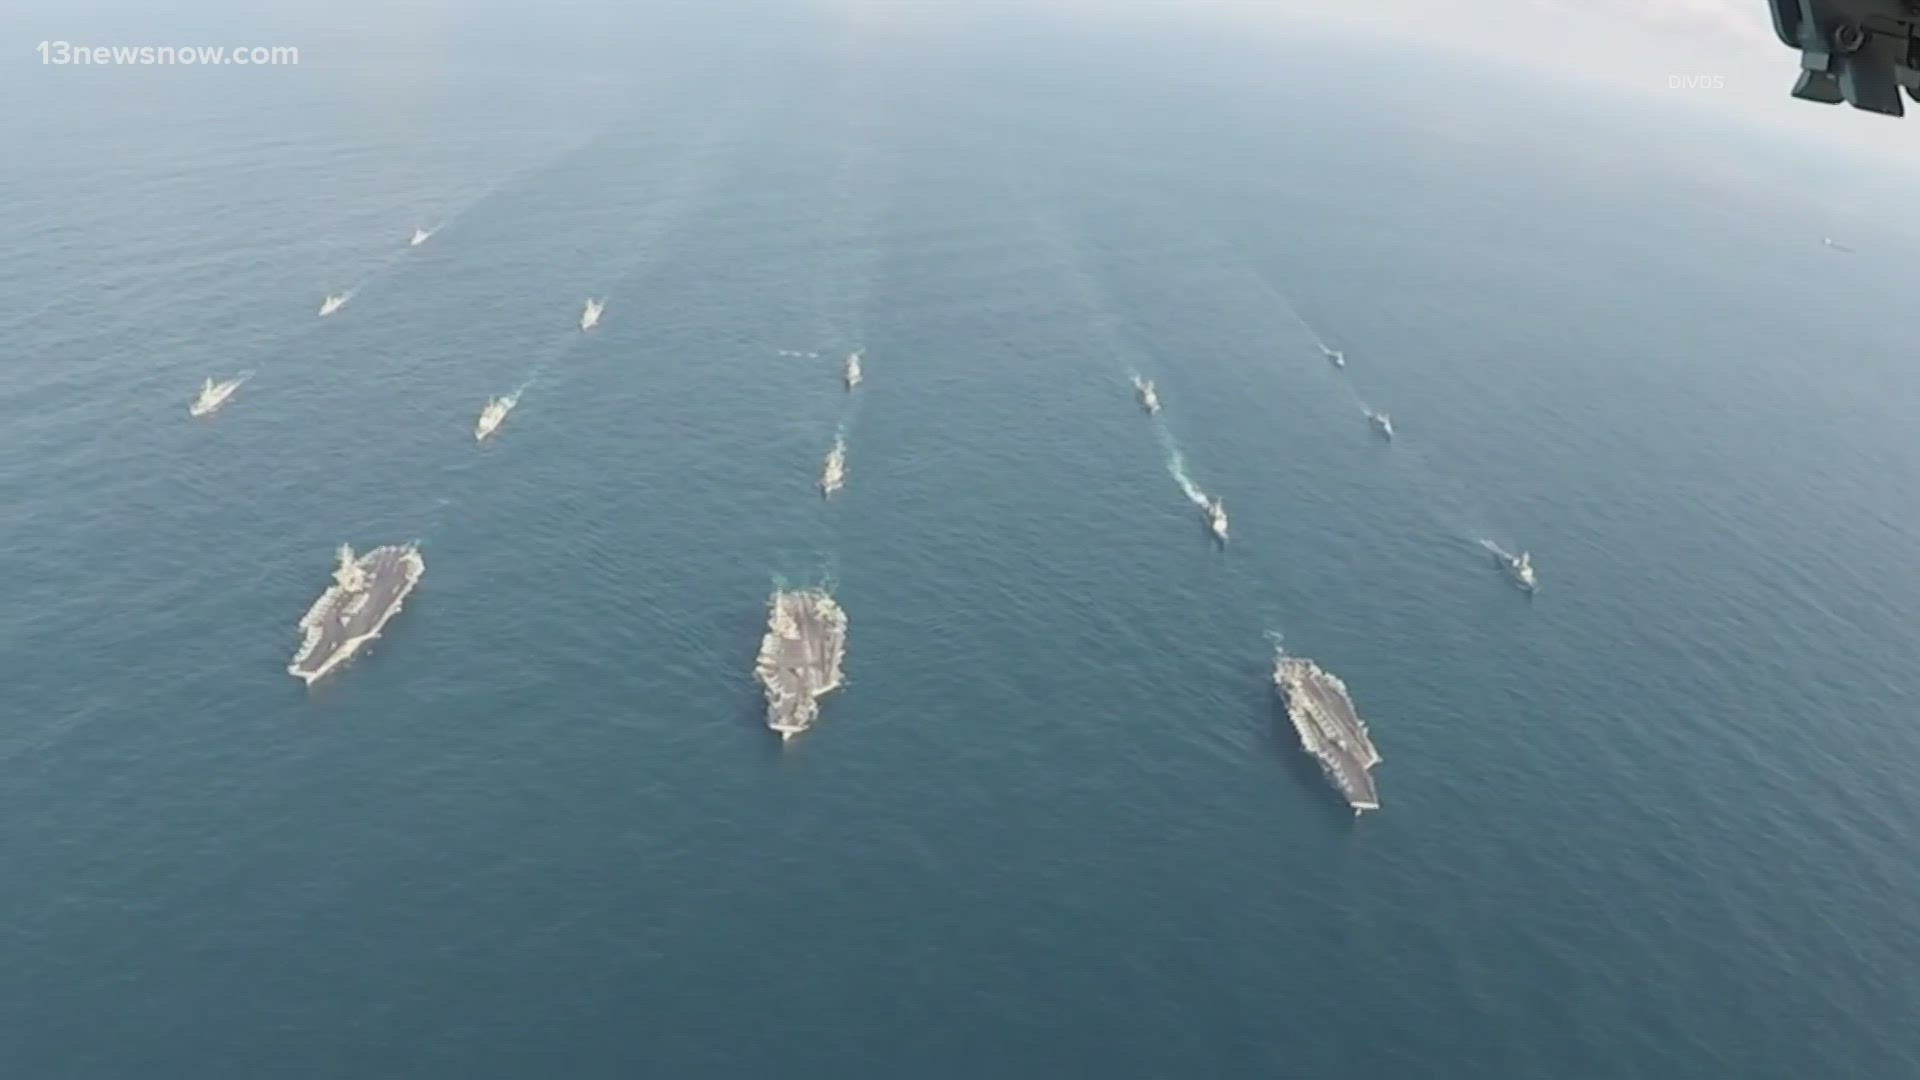 The Navy hopes to add 9 ships to the fleet next year, but at the same time, eliminate 11 ships, which won't help get the Navy to its stated goal of 355 ships.